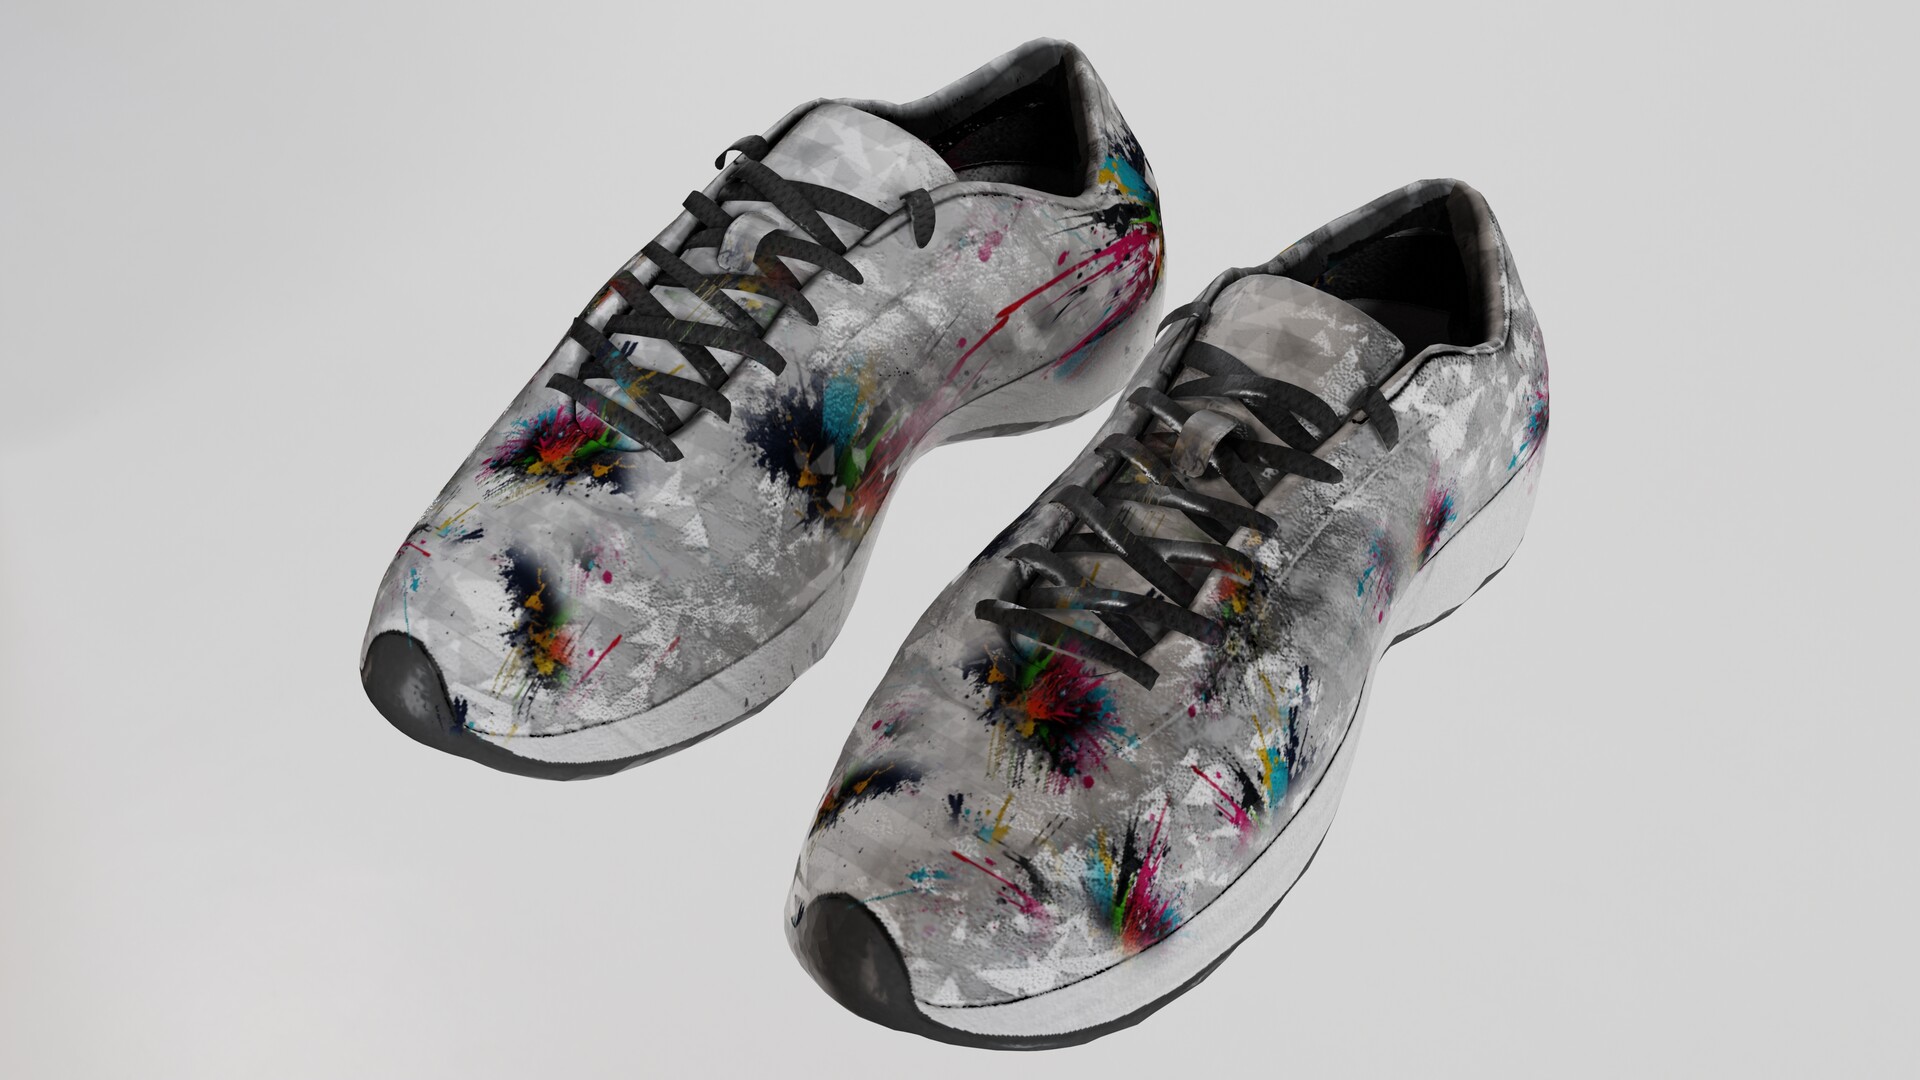 ArtStation - Gray sneakers with paint splashes